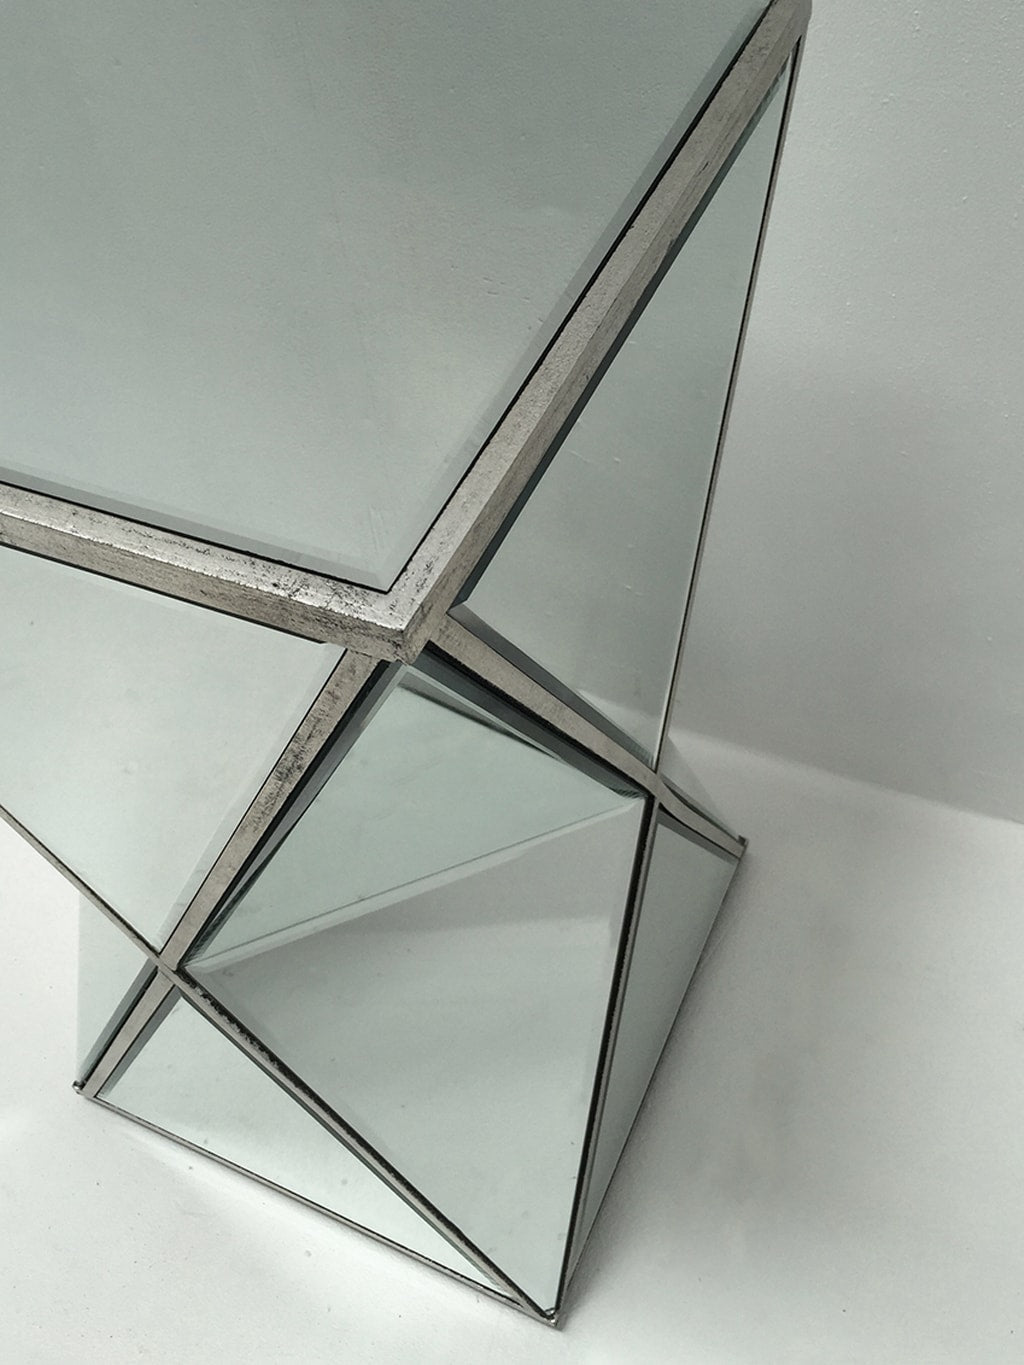 Mirrored Side Table with triangle bevelled glass panels